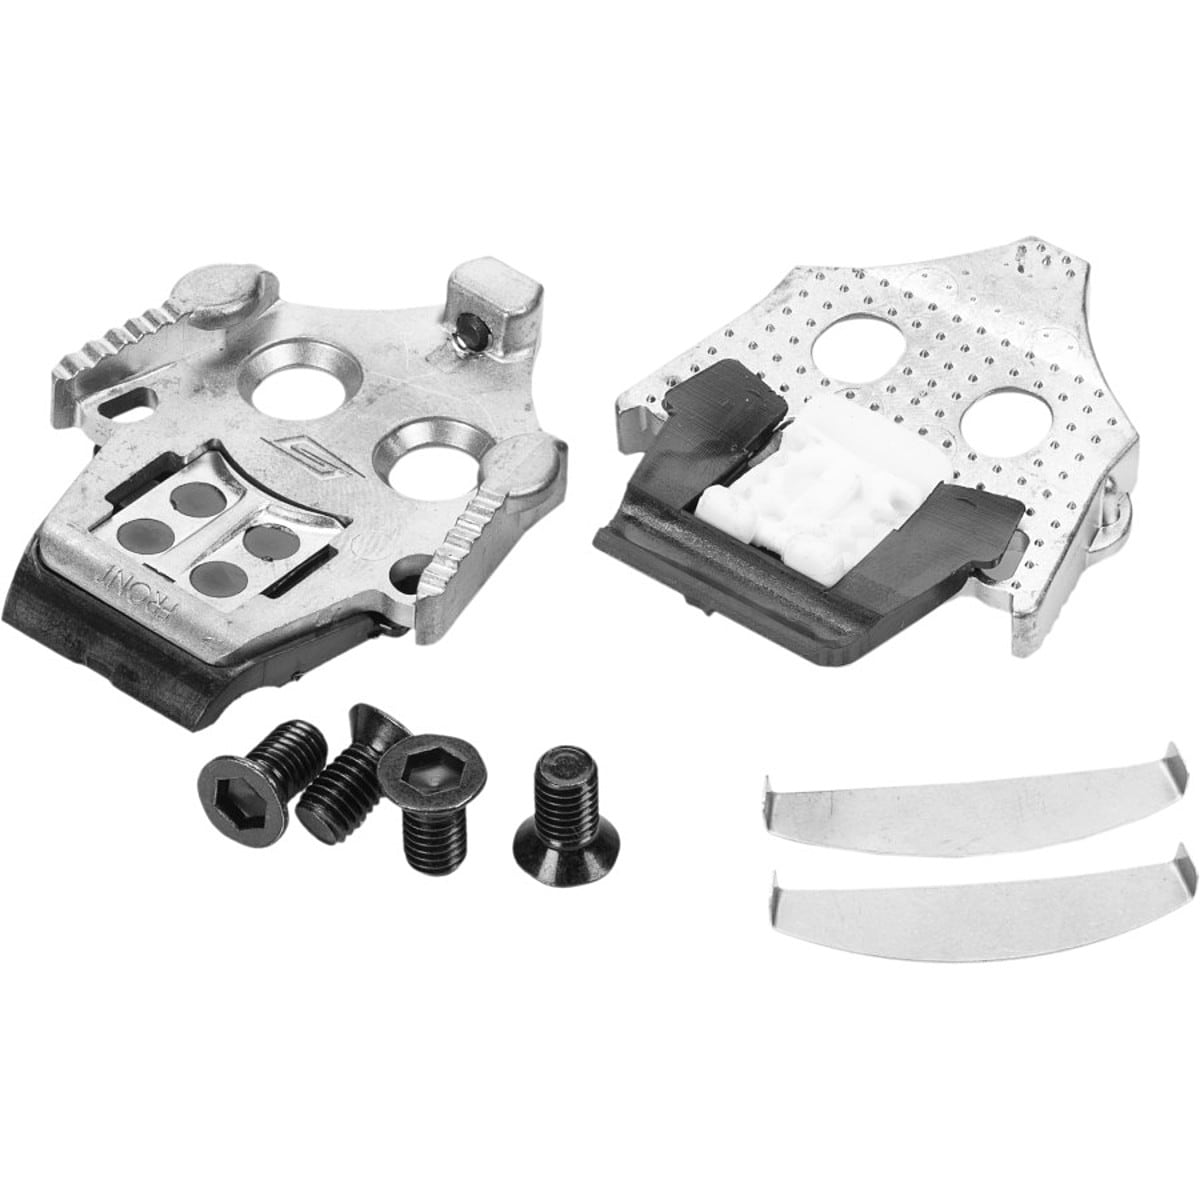 G3 Frog Cleats - Components